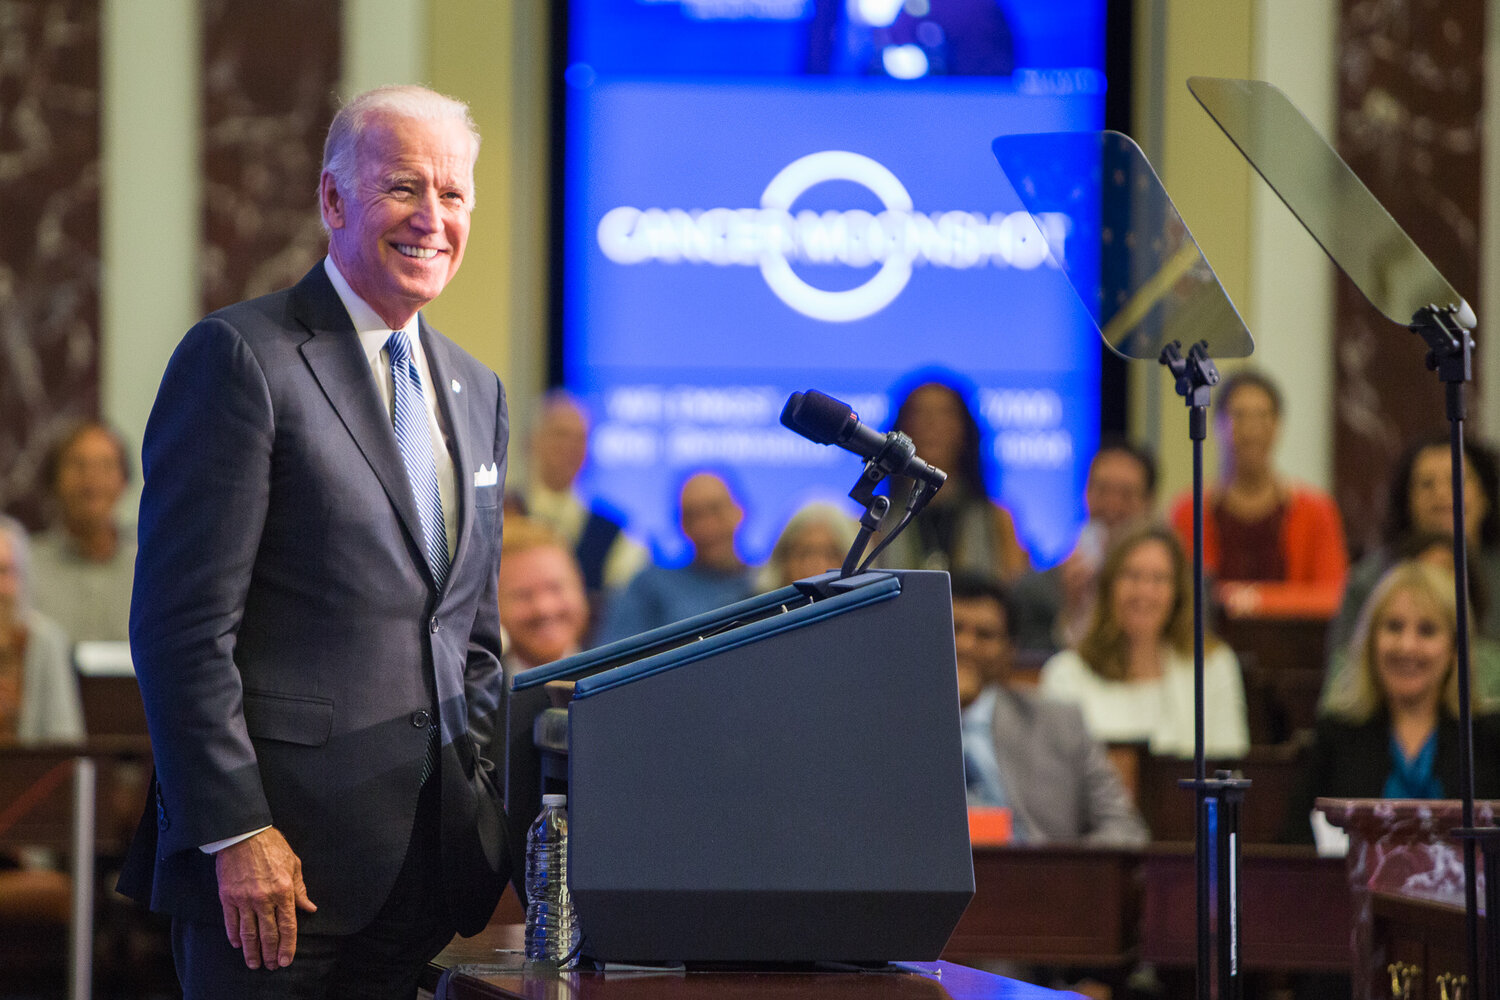 Joe Biden smiles at a crowd as he stands at a podium.